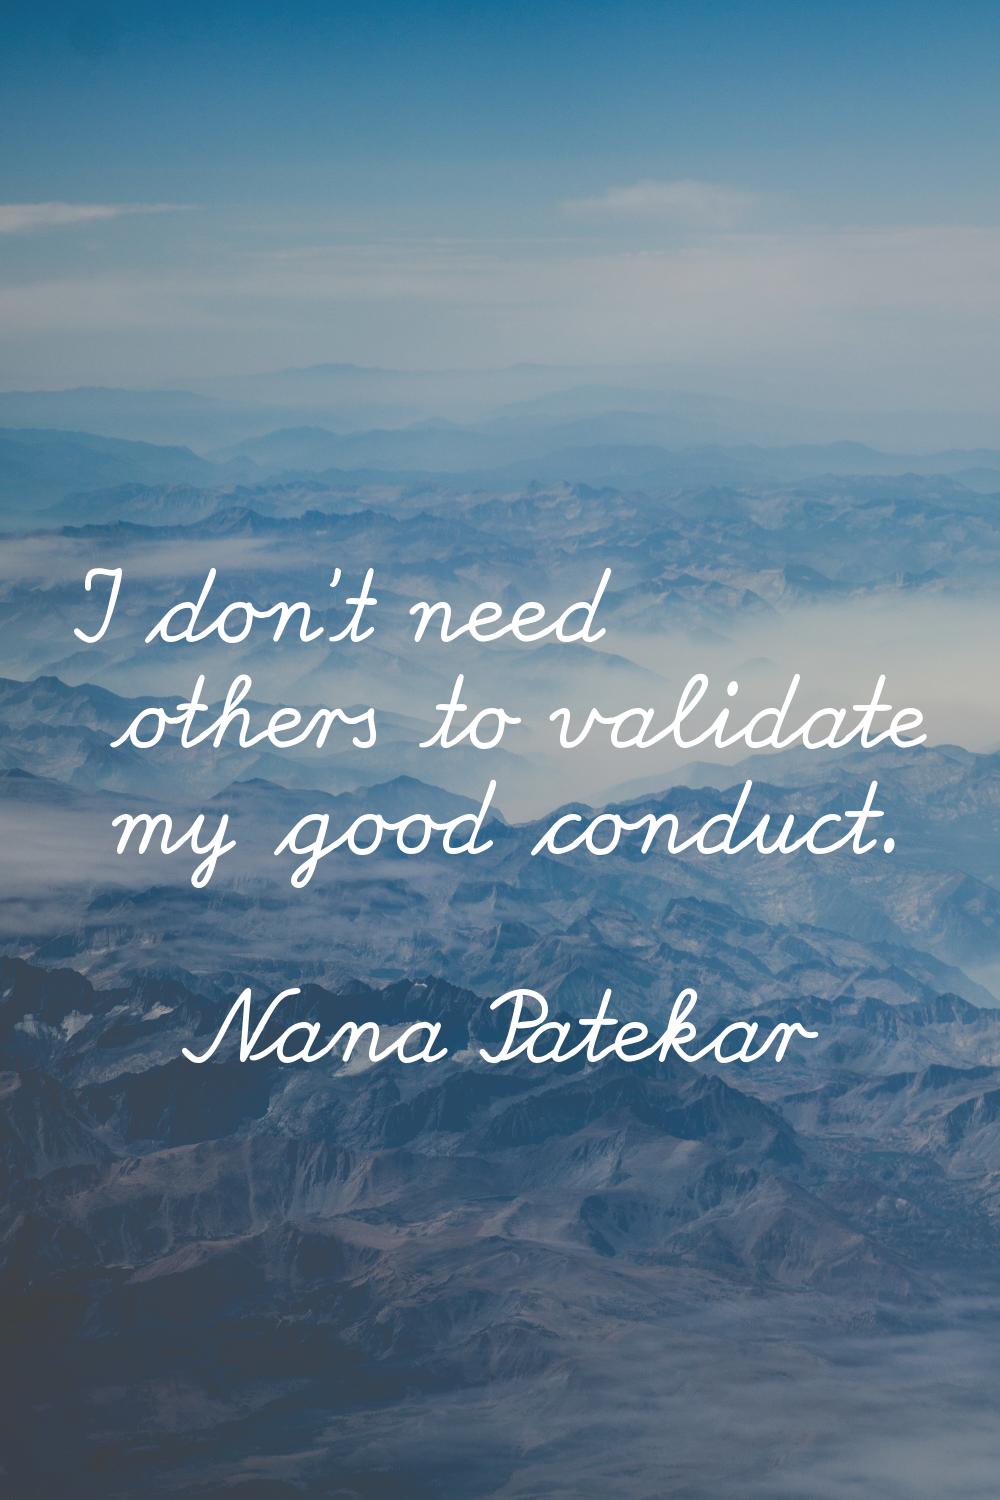 I don't need others to validate my good conduct.